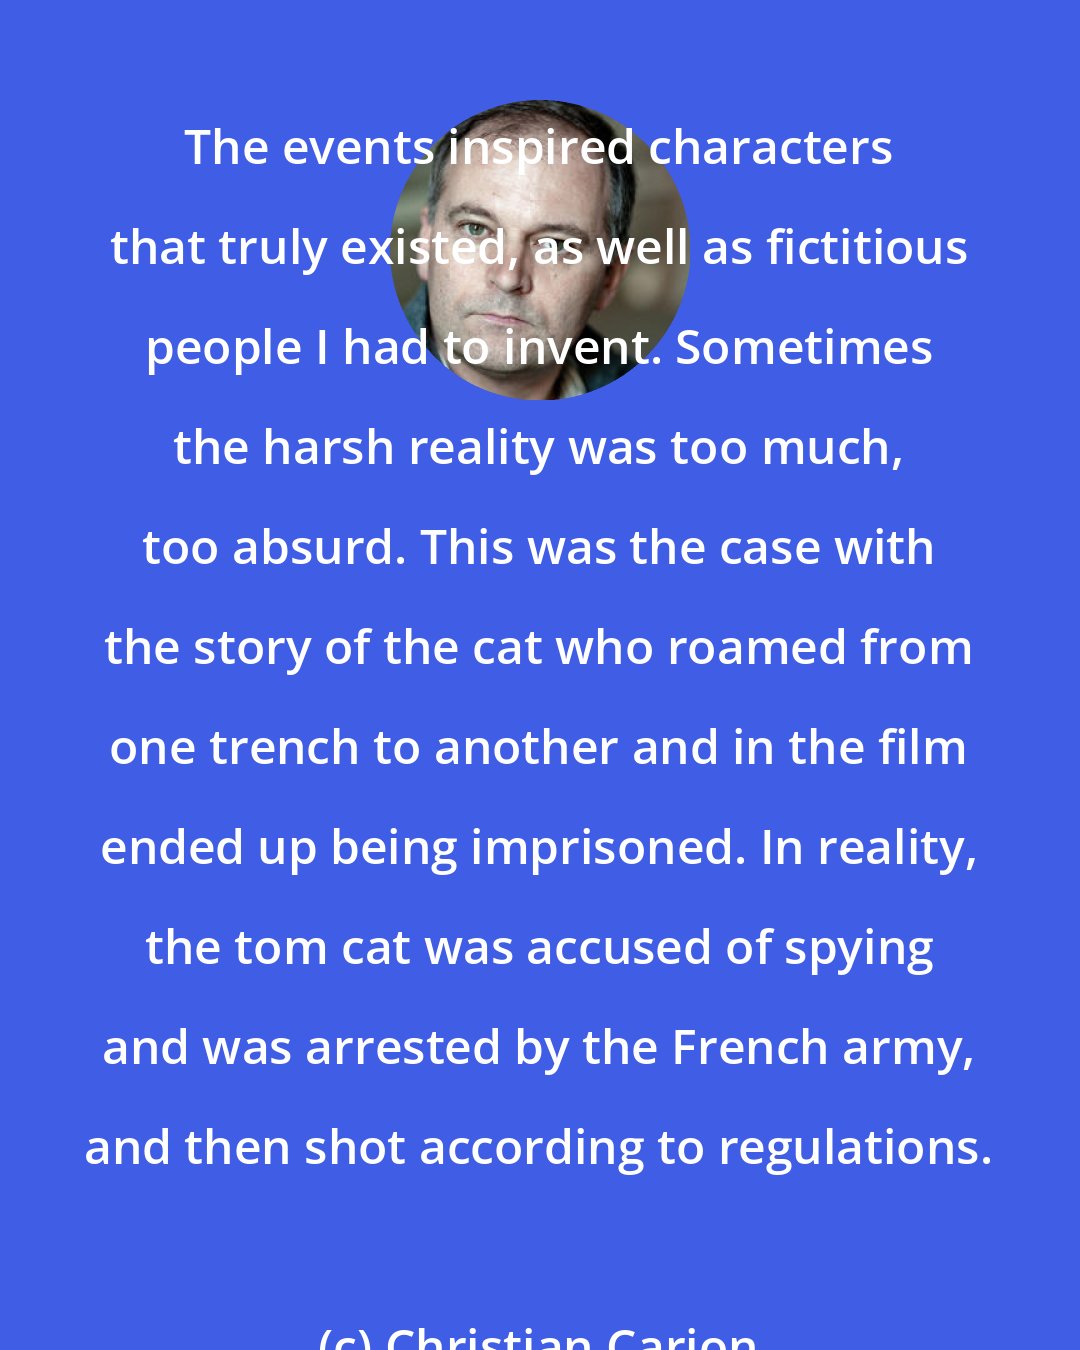 Christian Carion: The events inspired characters that truly existed, as well as fictitious people I had to invent. Sometimes the harsh reality was too much, too absurd. This was the case with the story of the cat who roamed from one trench to another and in the film ended up being imprisoned. In reality, the tom cat was accused of spying and was arrested by the French army, and then shot according to regulations.